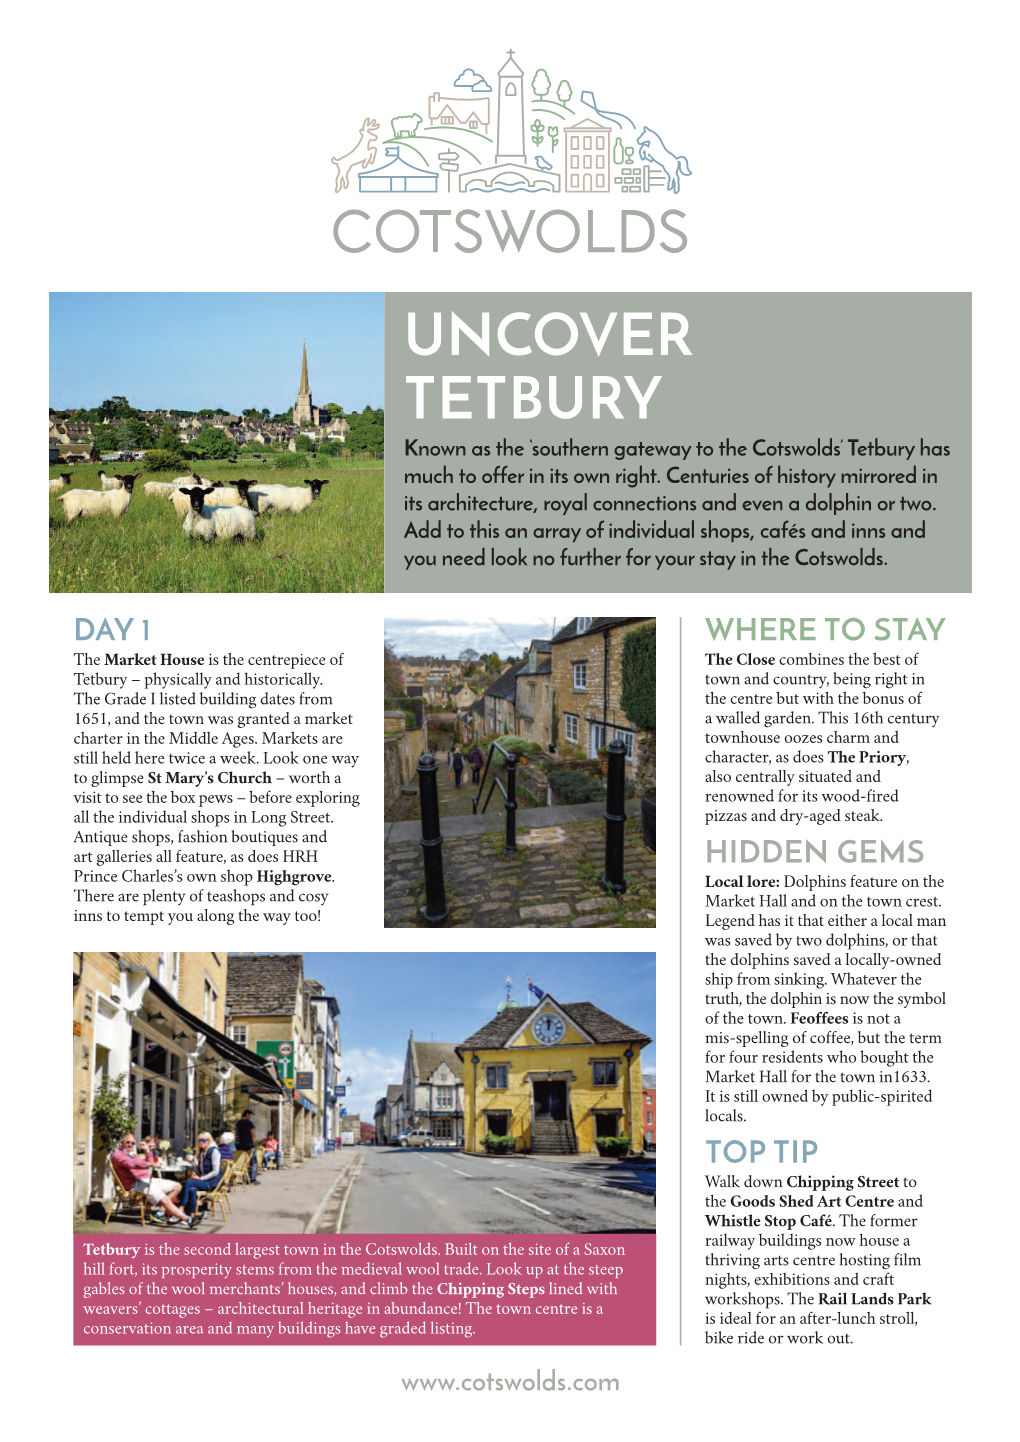 Uncover Tetbury Known As the ‘Southern Gateway to the Cotswold S’ Tetbury Has Much to Offer in Its Own Right